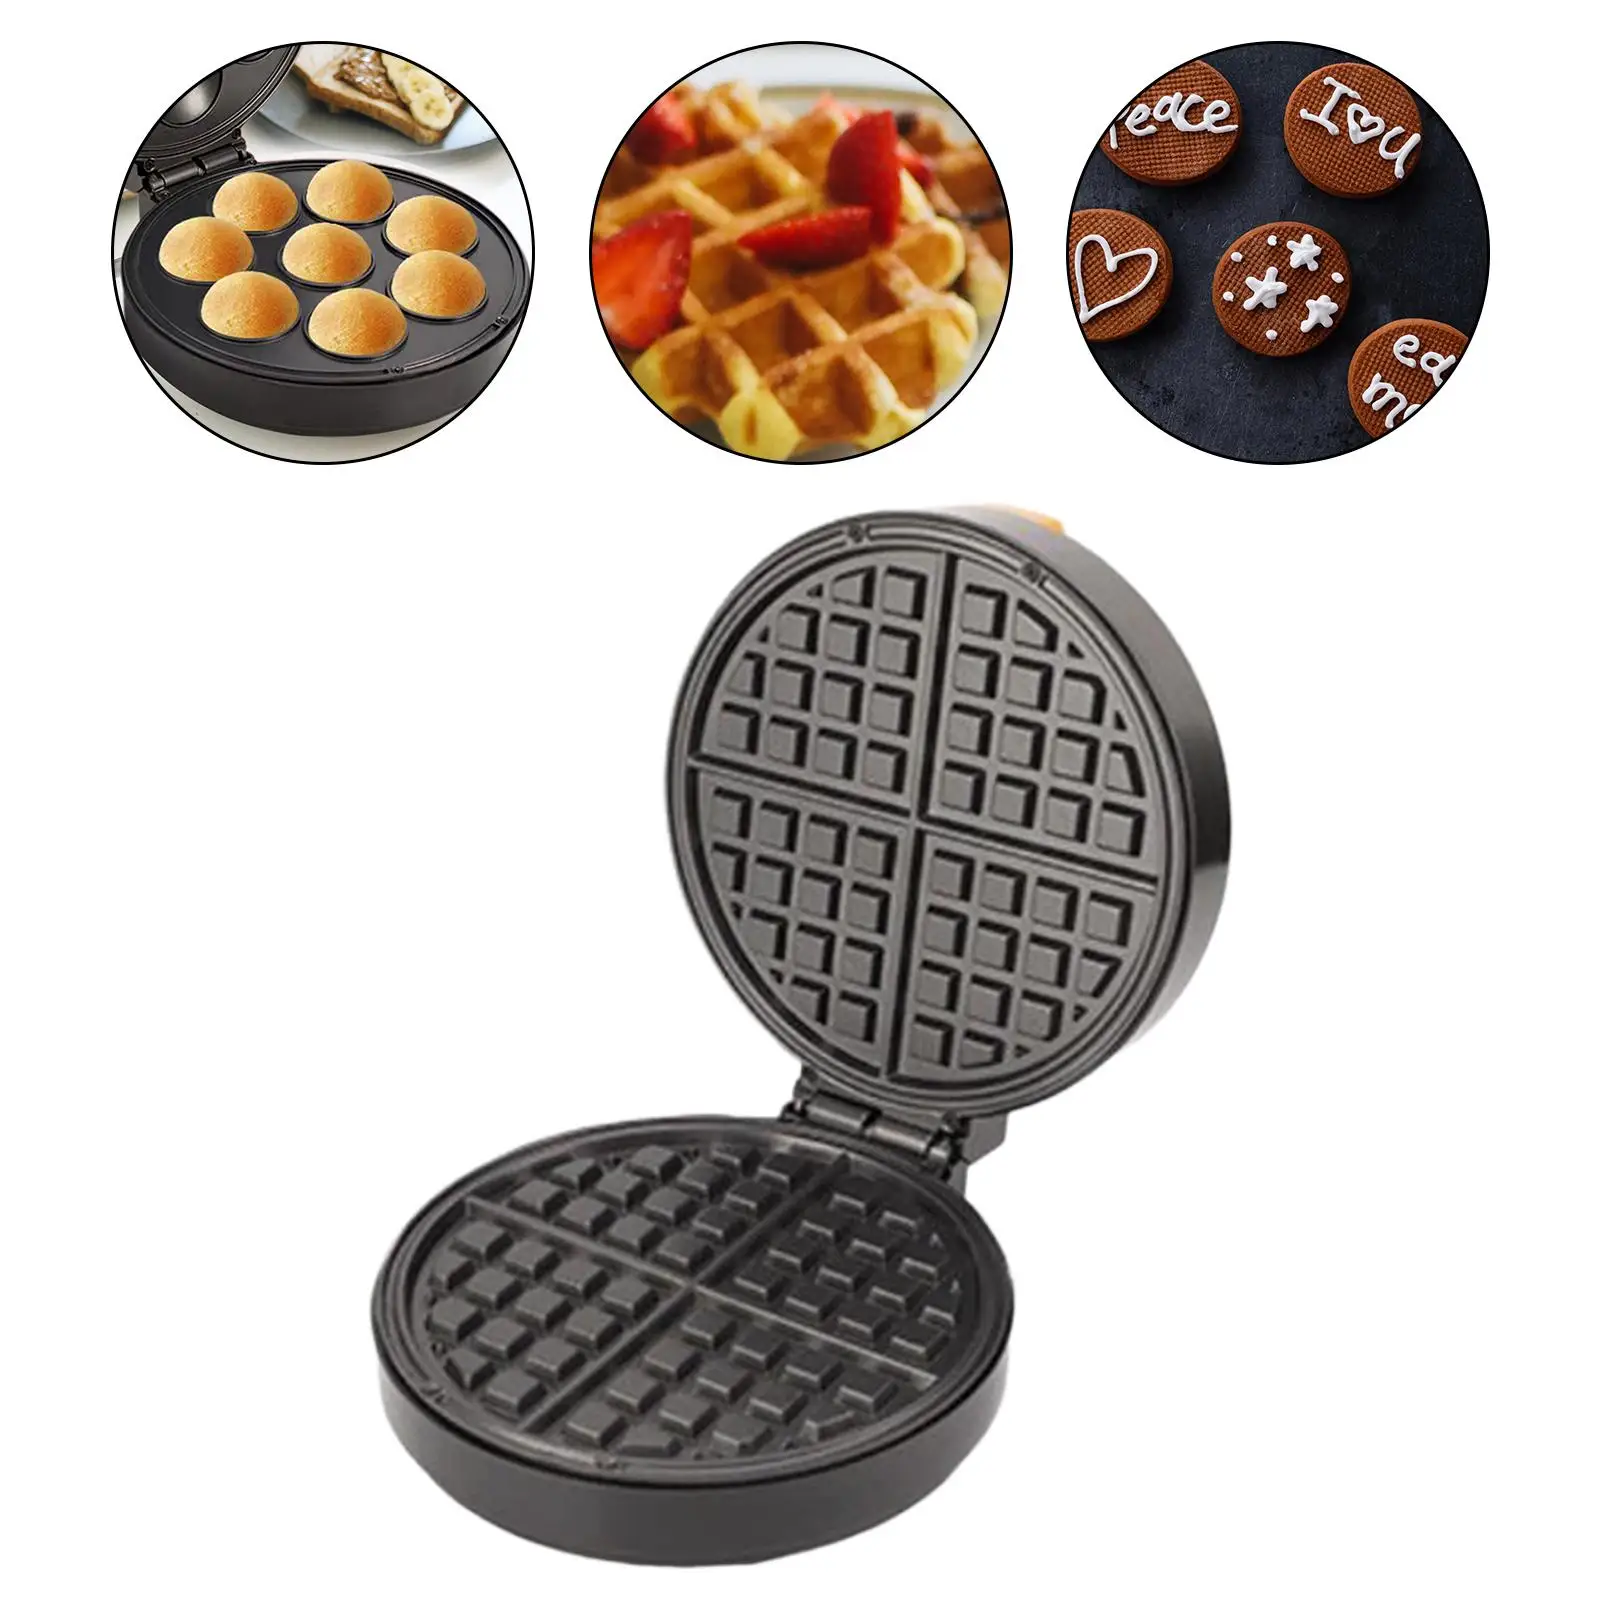 Cooking Plates Portable LED Display Multifunctional Household Waffle Furnace for Oatmeal